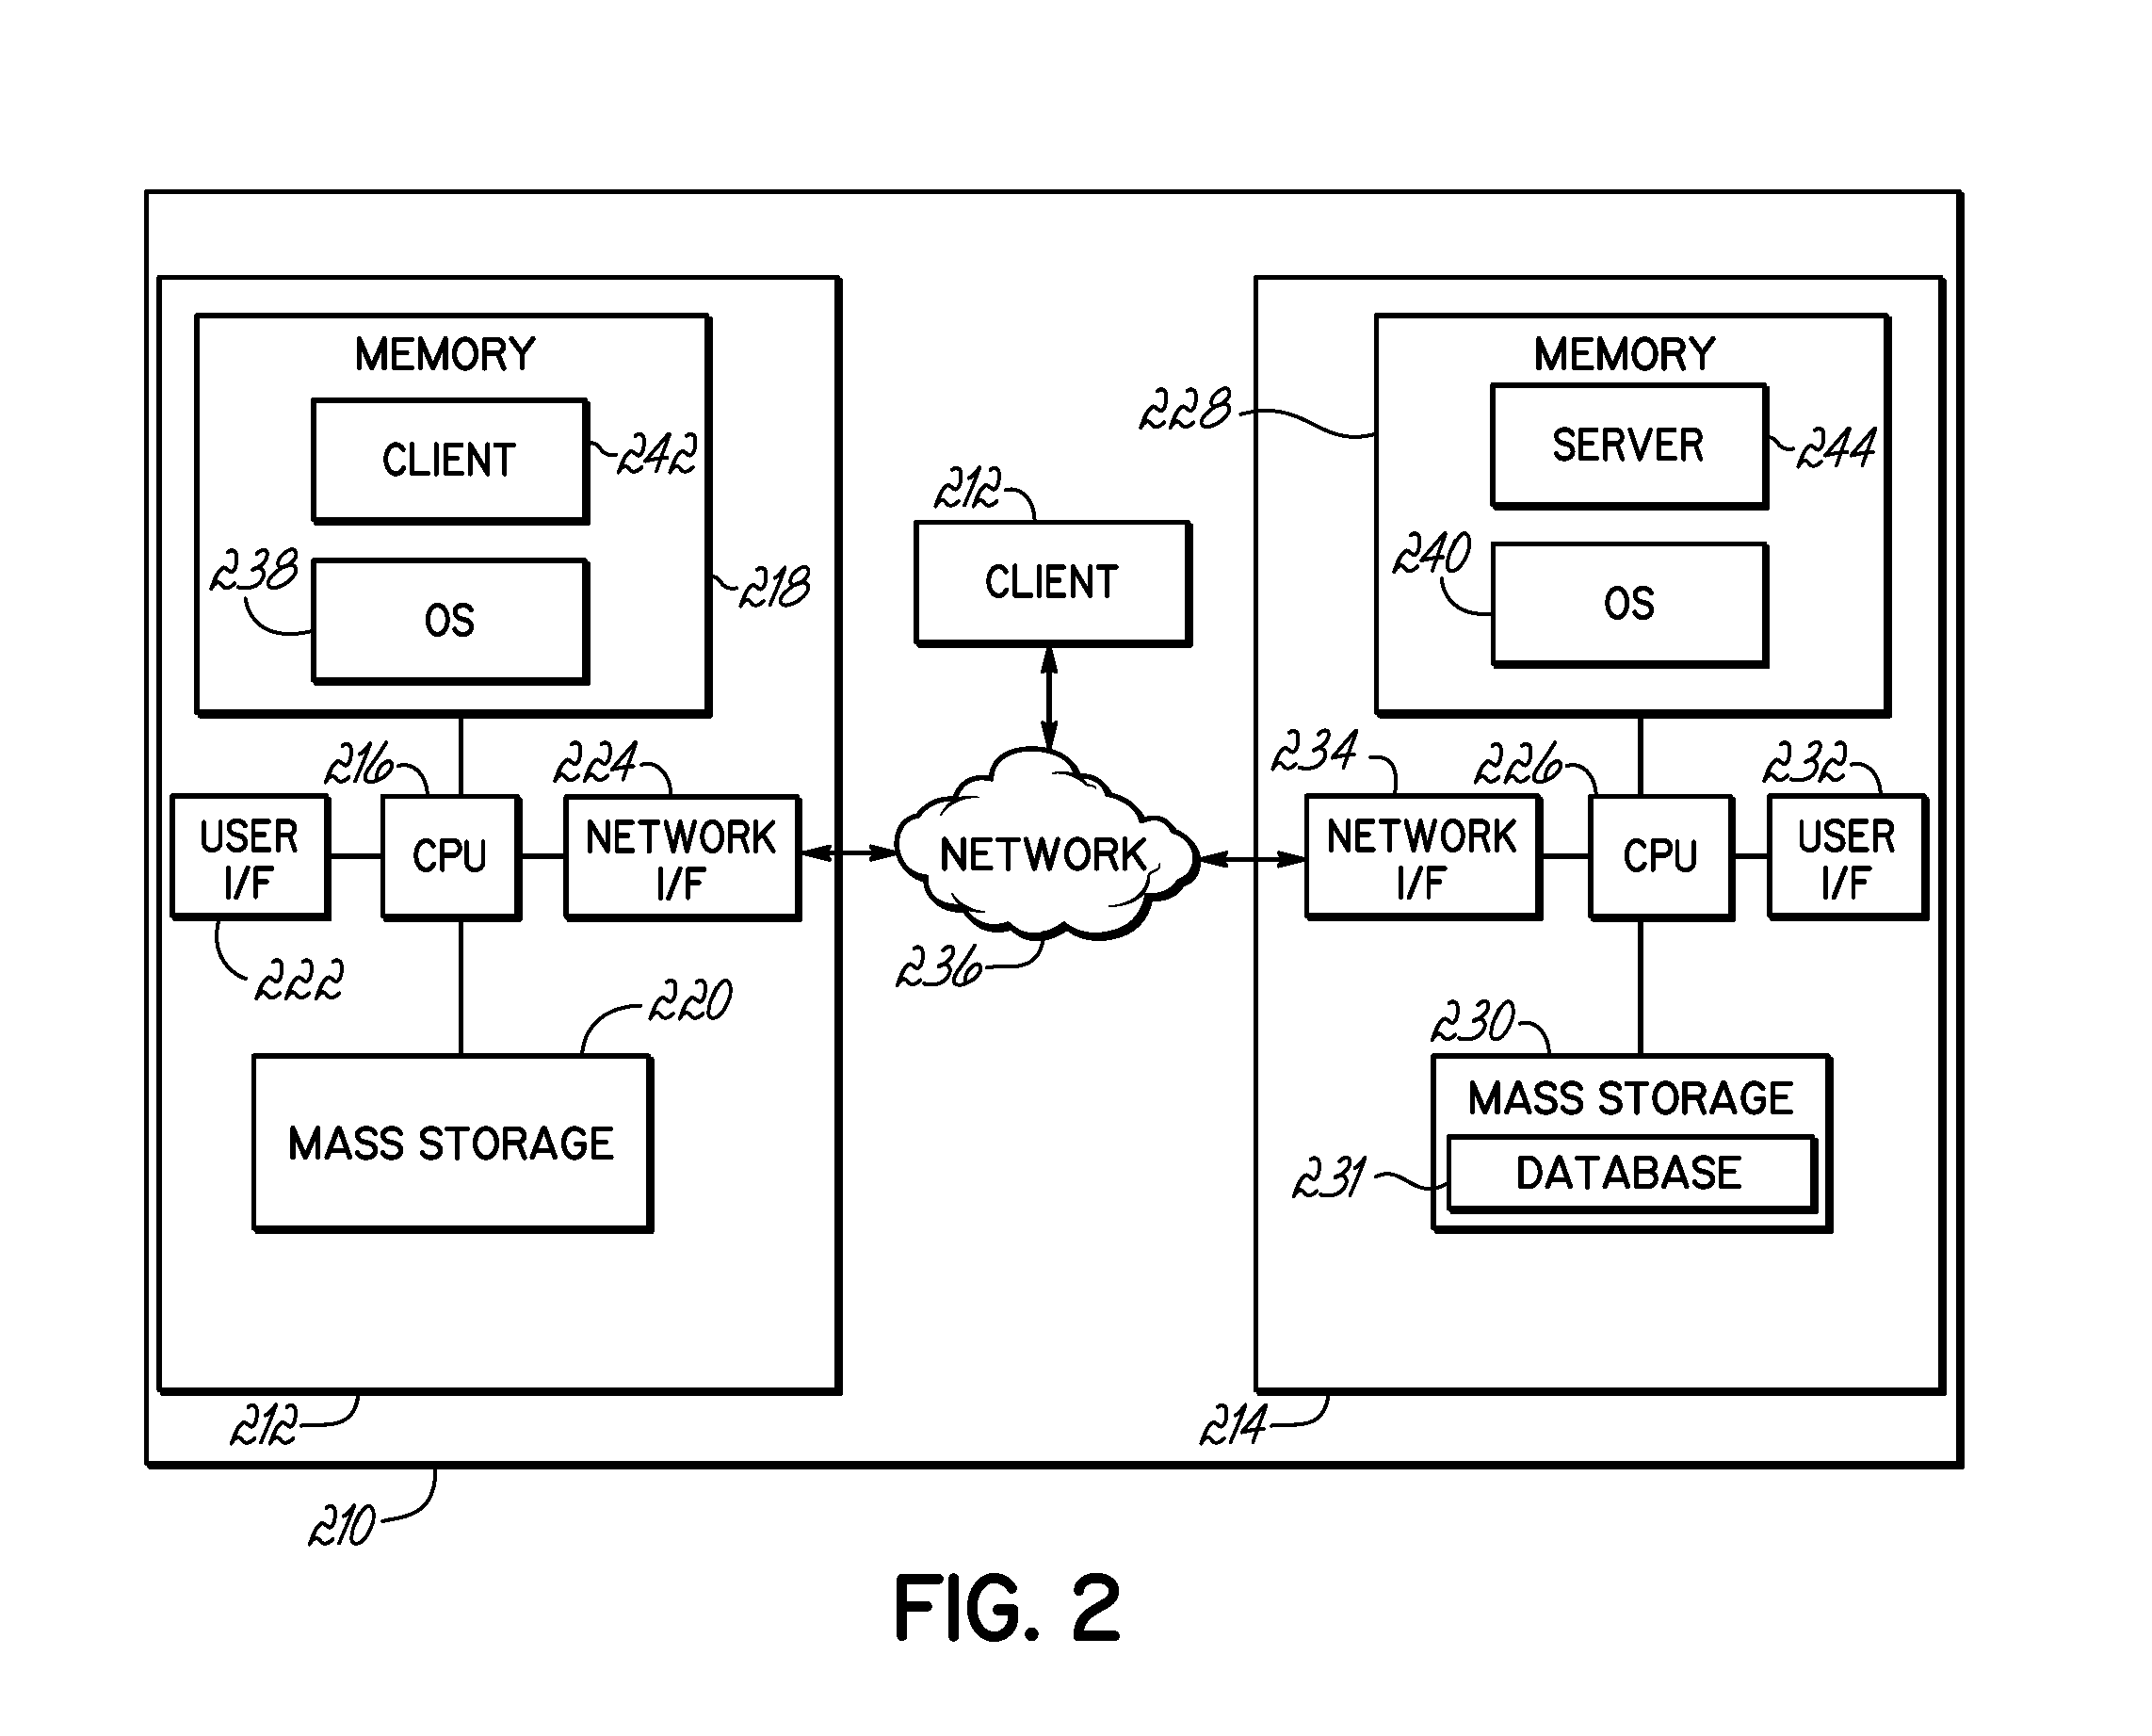 Energy consumption reporting and modification system